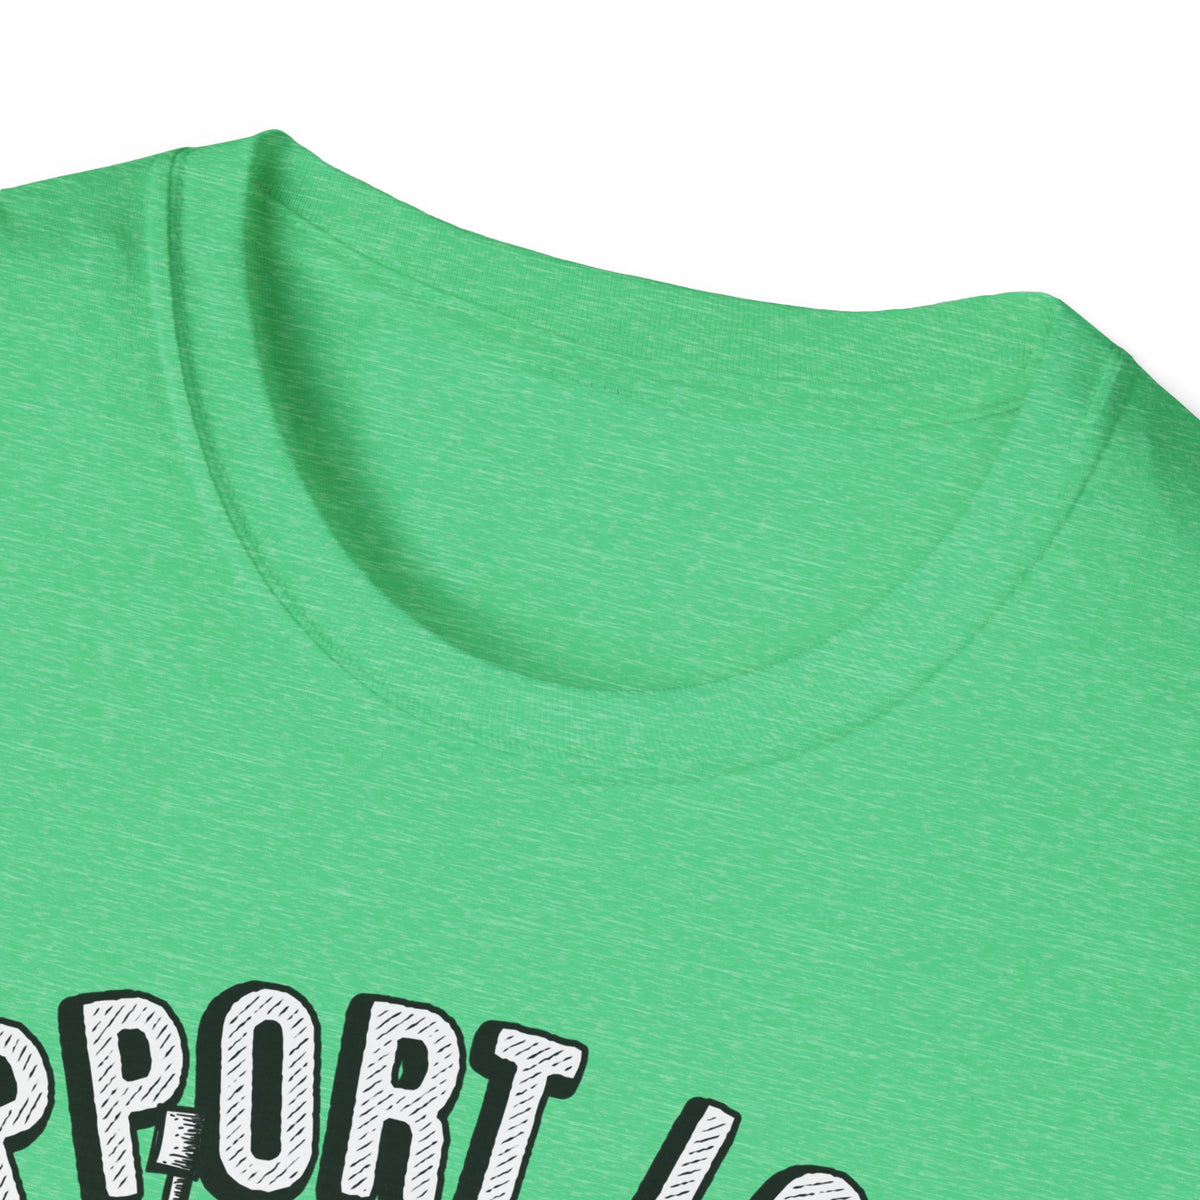 Support Local Farmers Farm To Table Shirt | Farm Girl Gift | Unisex Soft Style T-Shirt